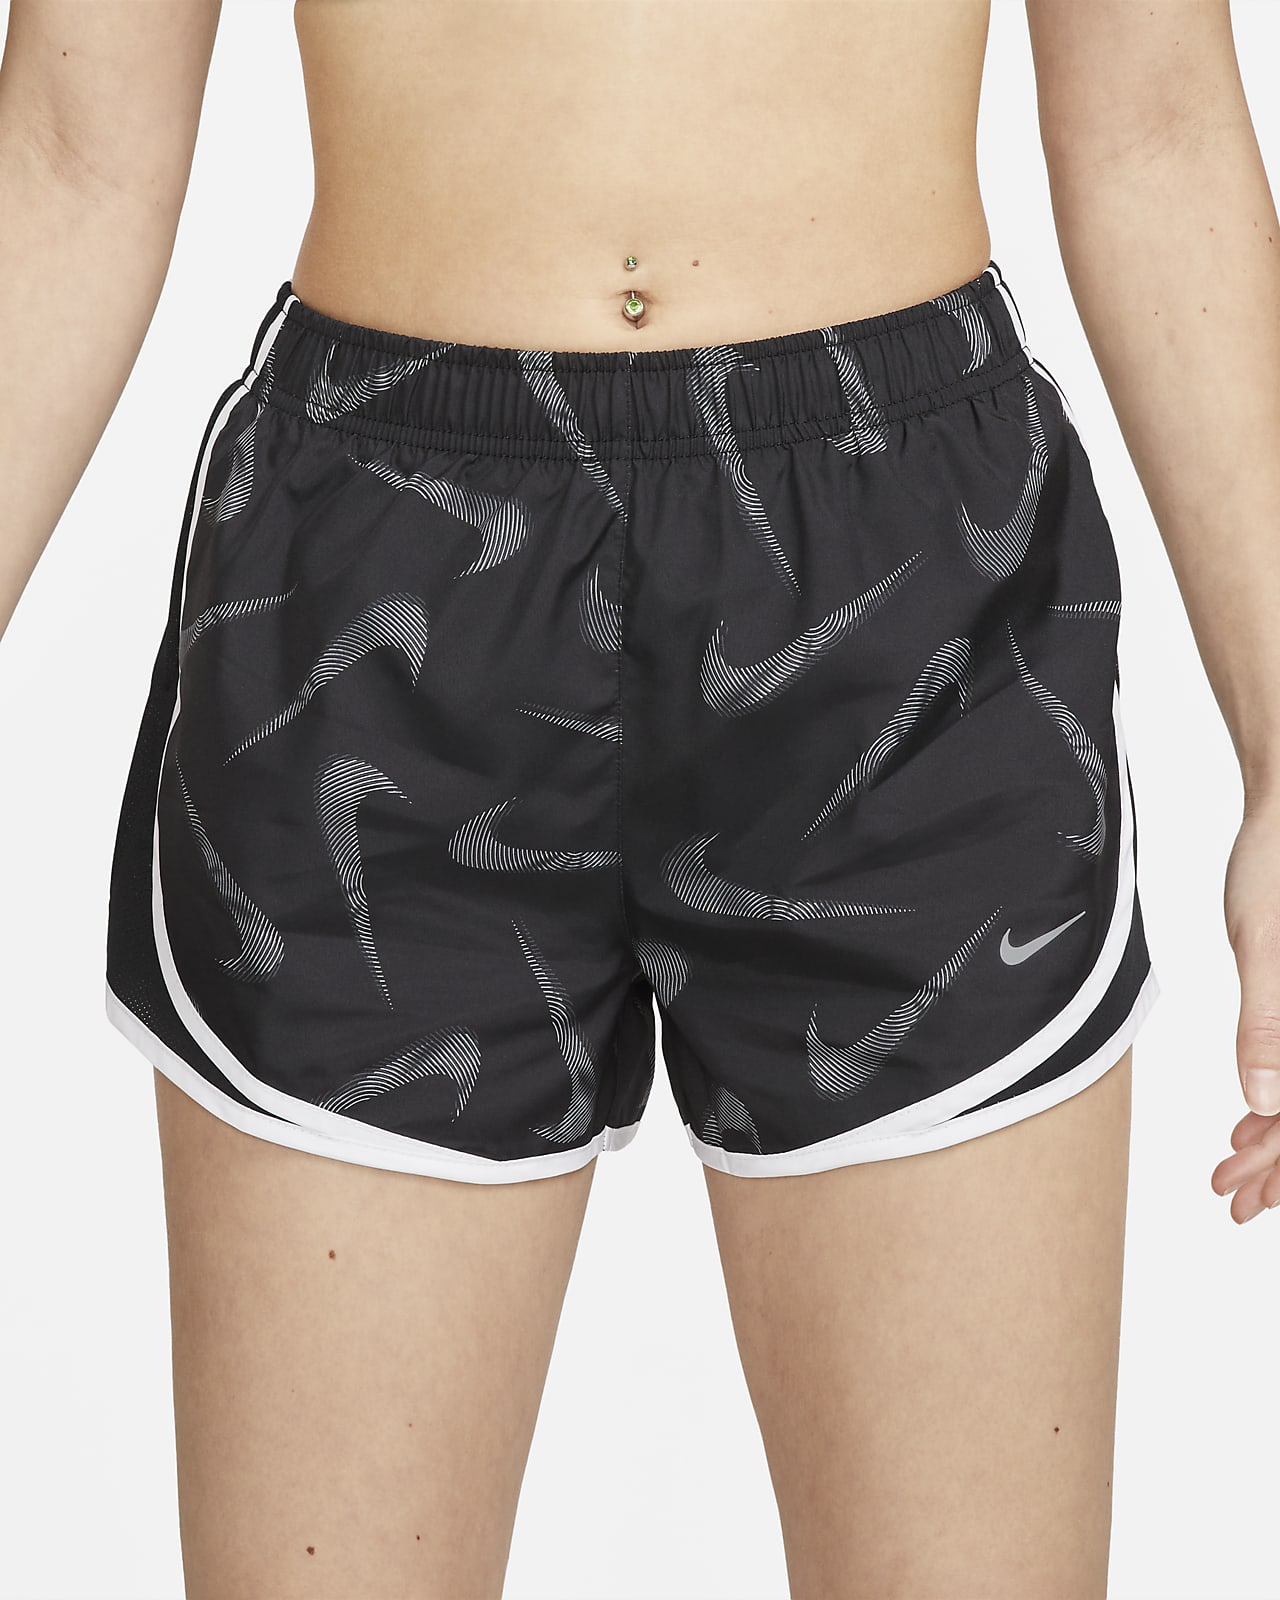 Nike Women's Brief-Lined Printed Tempo Running Shorts